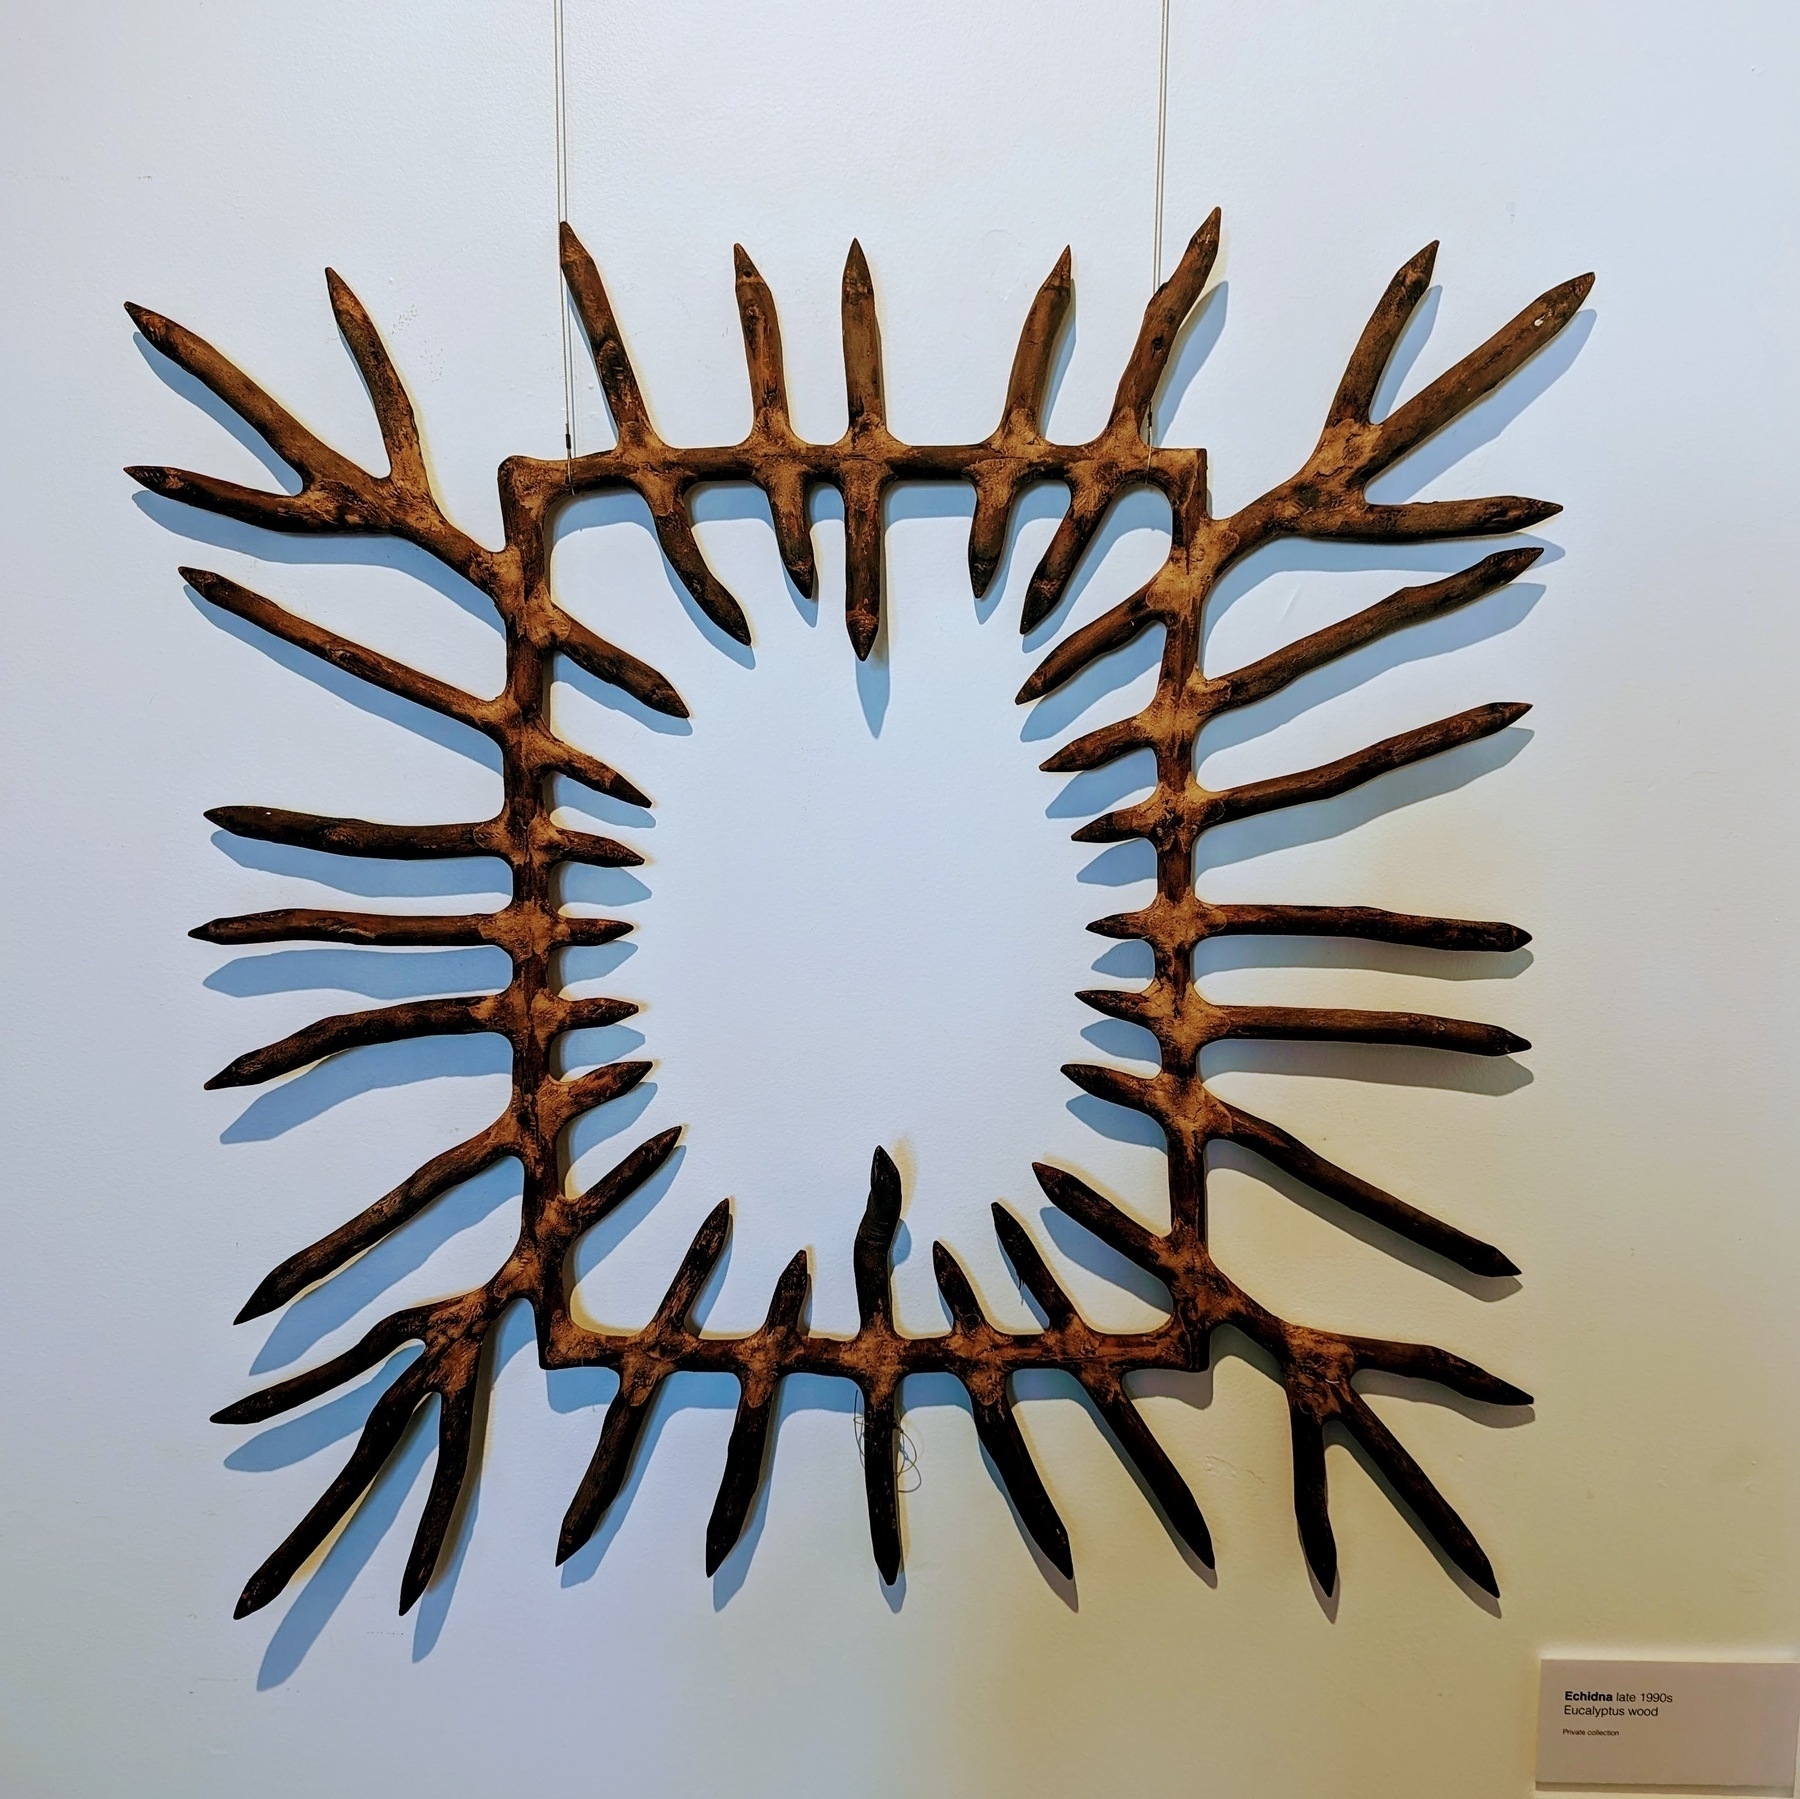 An artwork made of sticks pointing inwards to form a rectangle. The void in the centre is reminiscent of an echidna